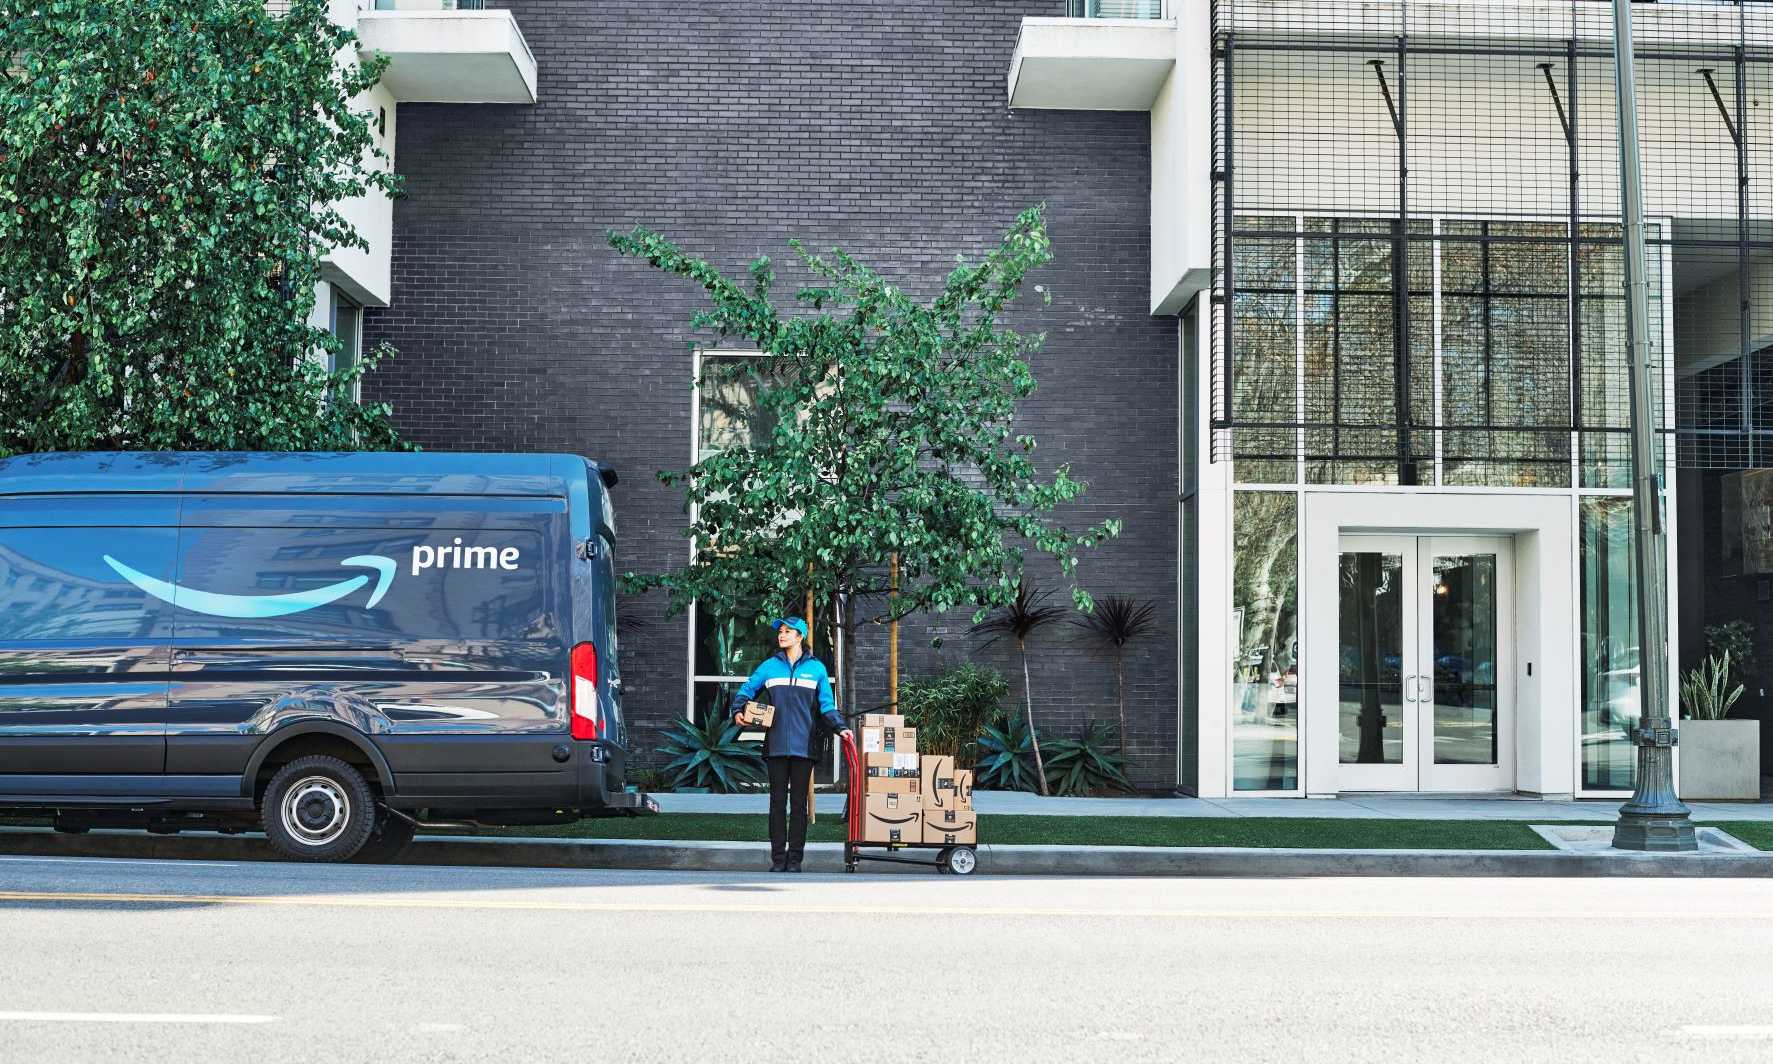 Interphone teams up with amazon key for business to streamline Amazon deliveries to commercial residential properties